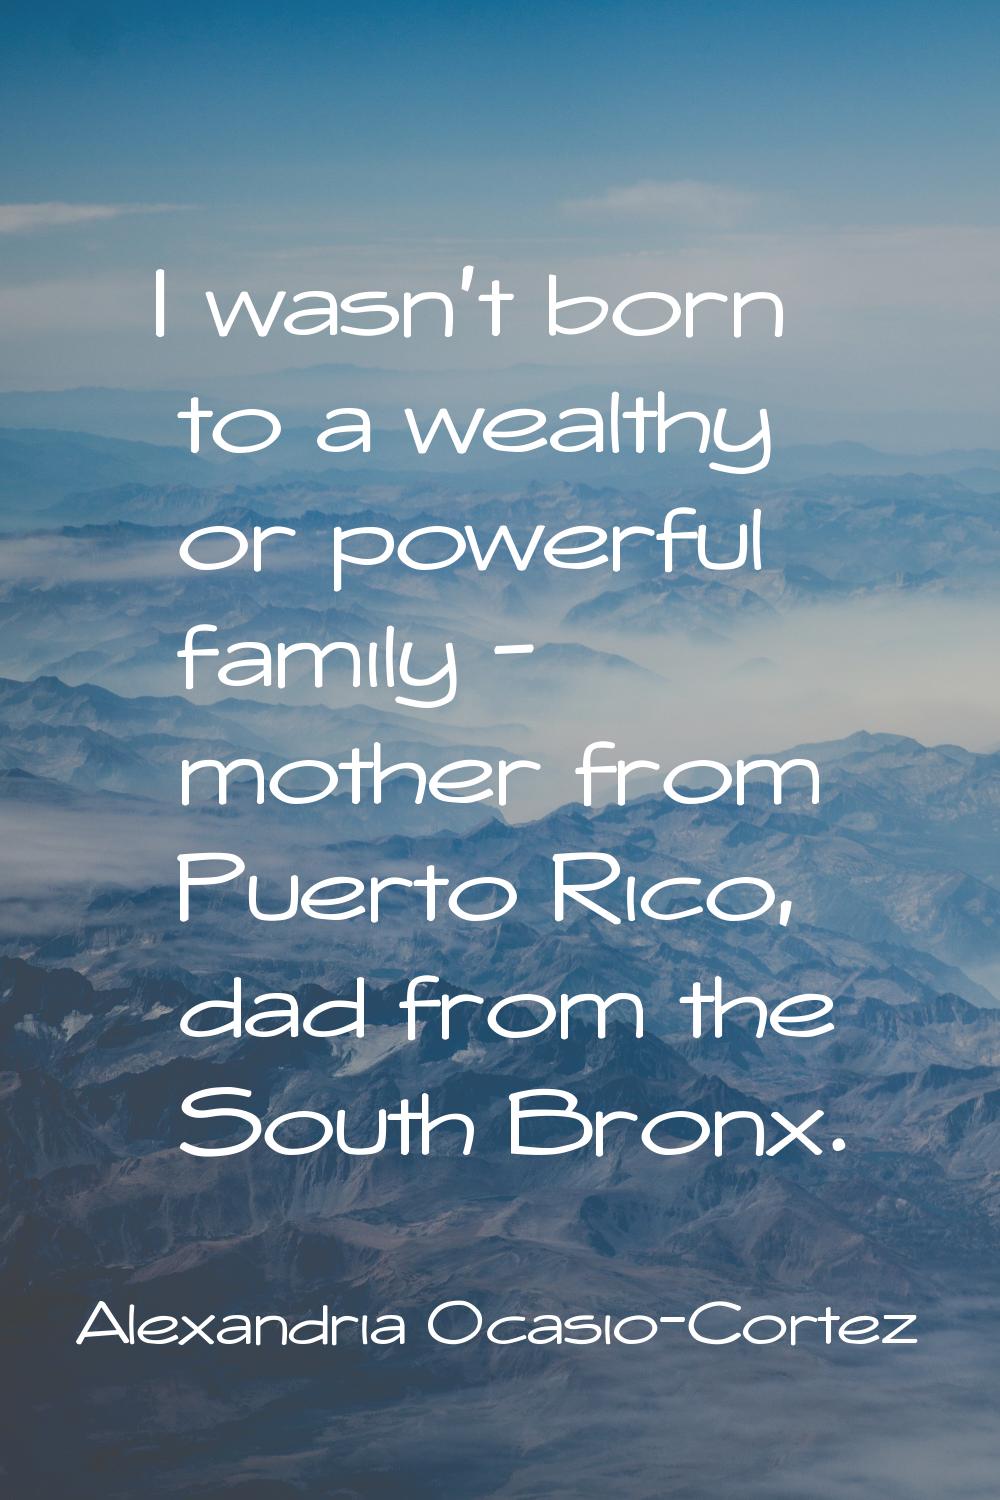 I wasn't born to a wealthy or powerful family - mother from Puerto Rico, dad from the South Bronx.